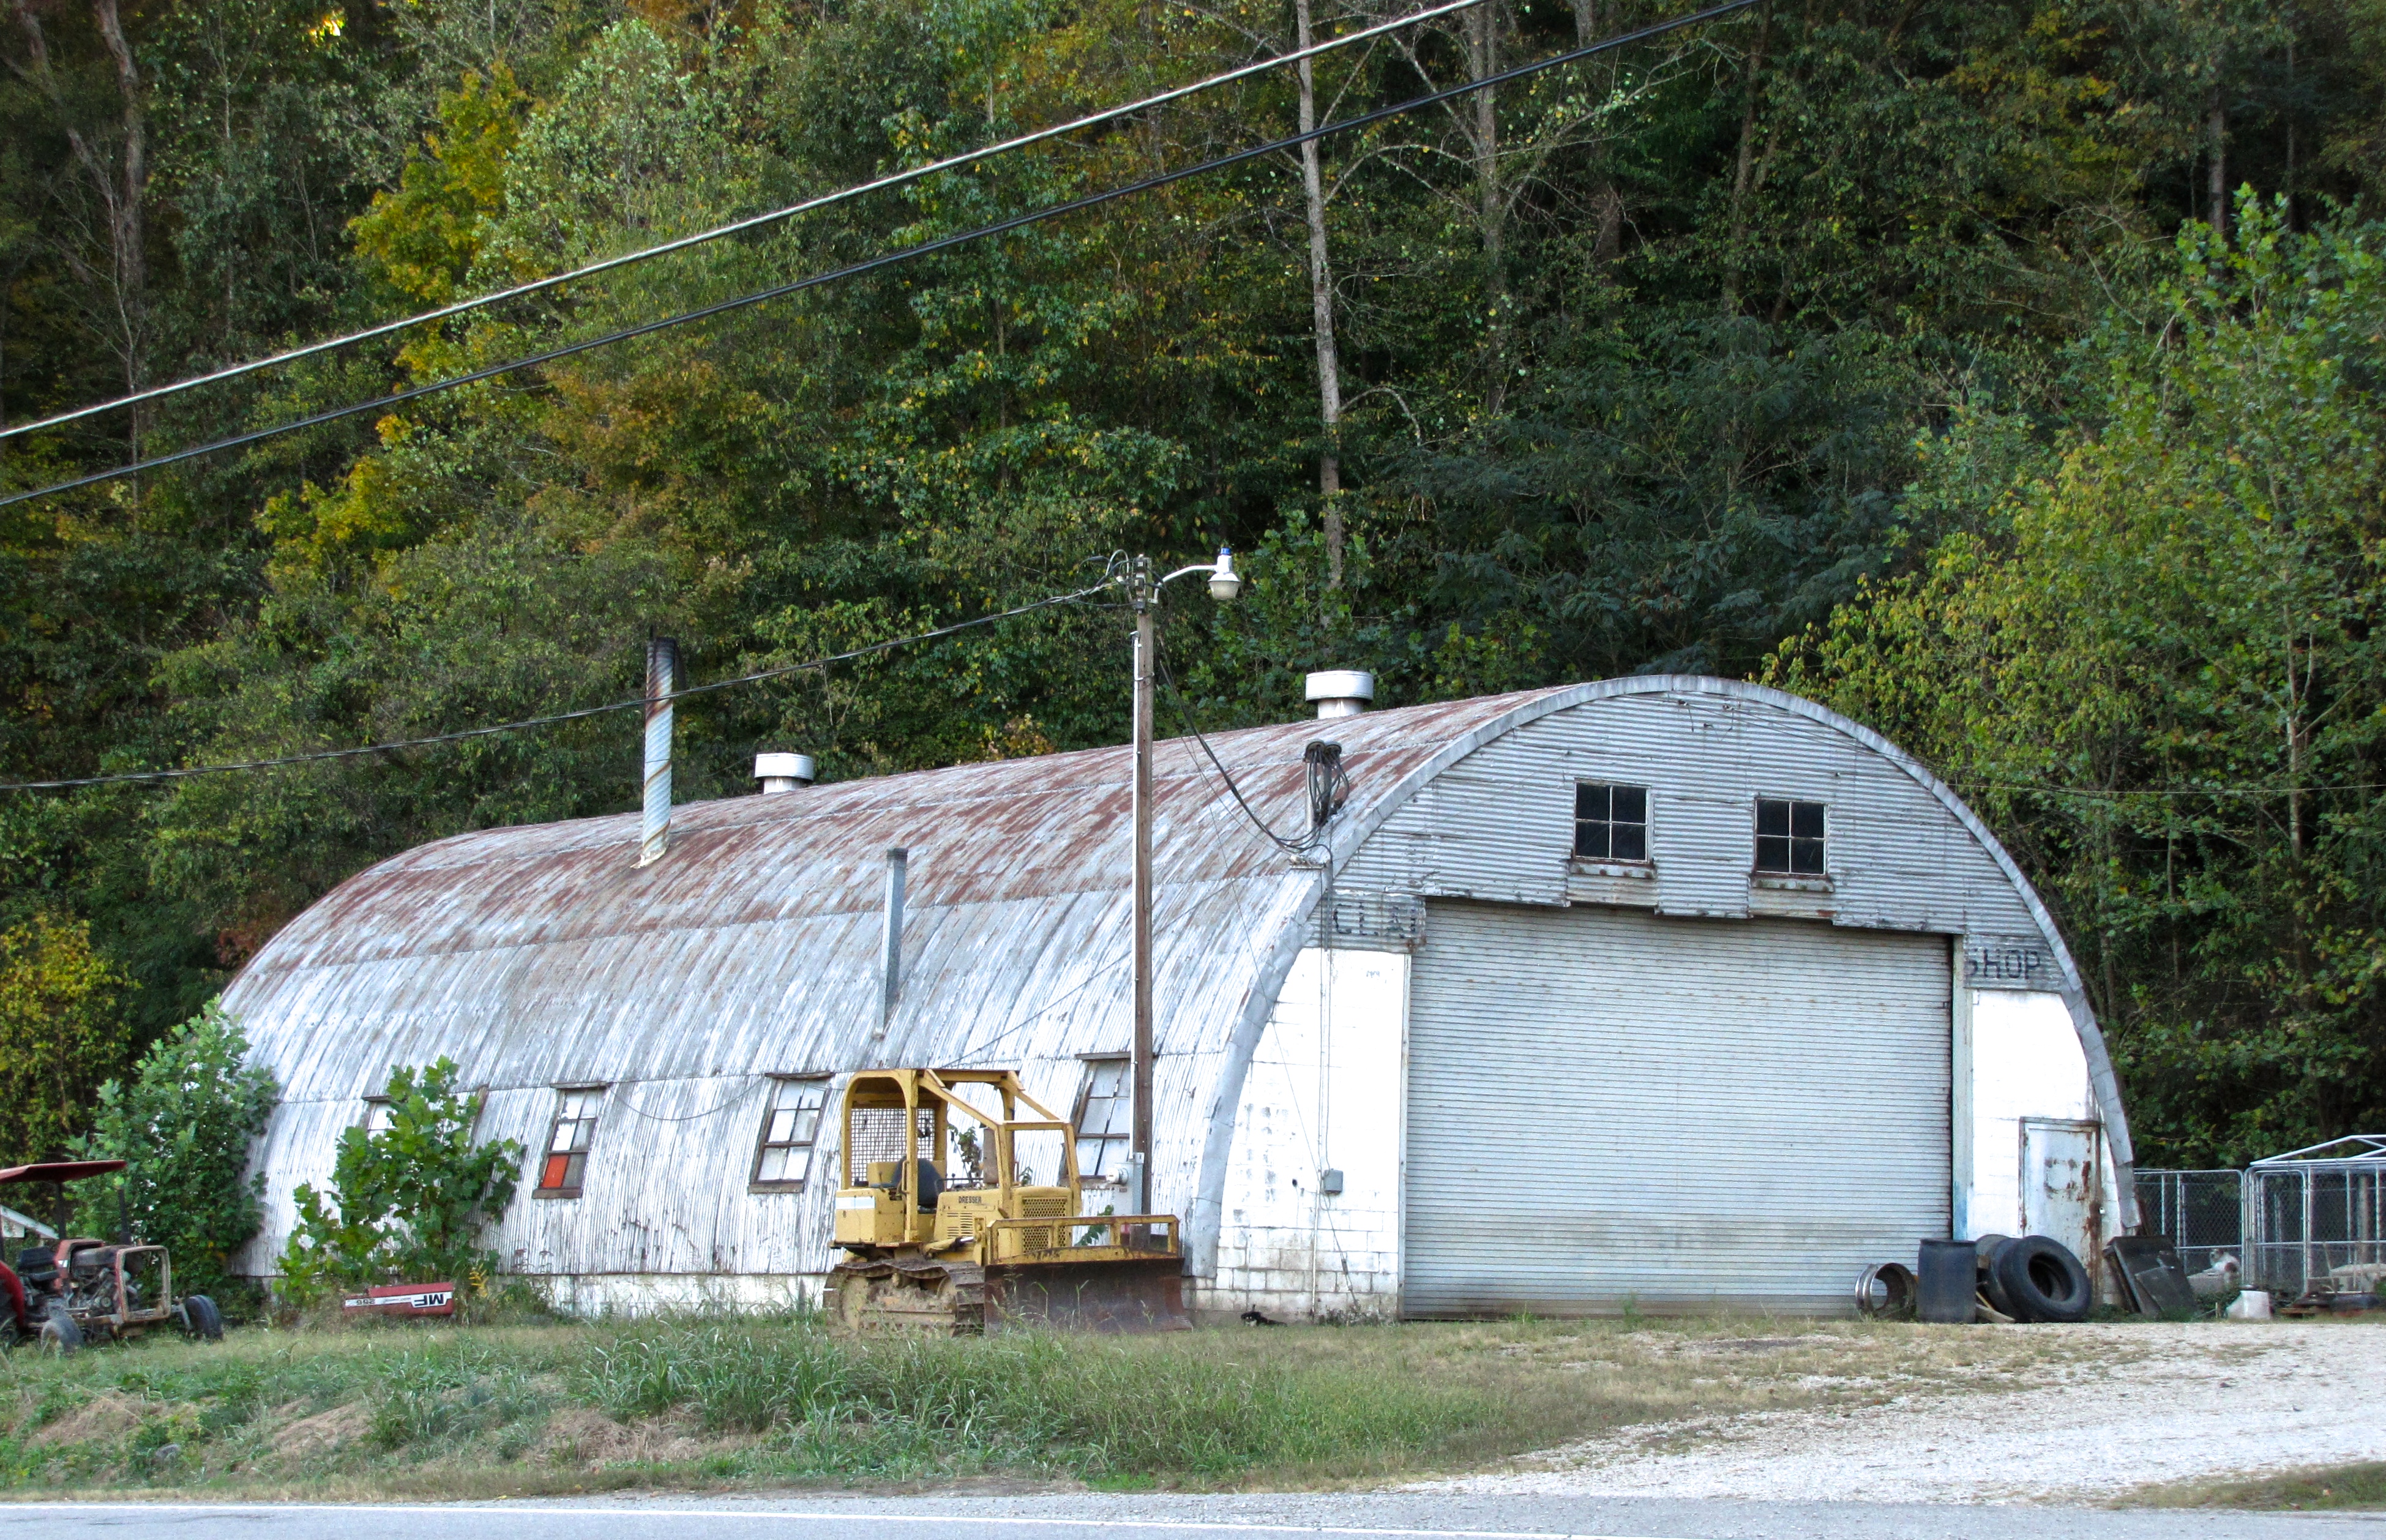 quonset hut in Millis, MA